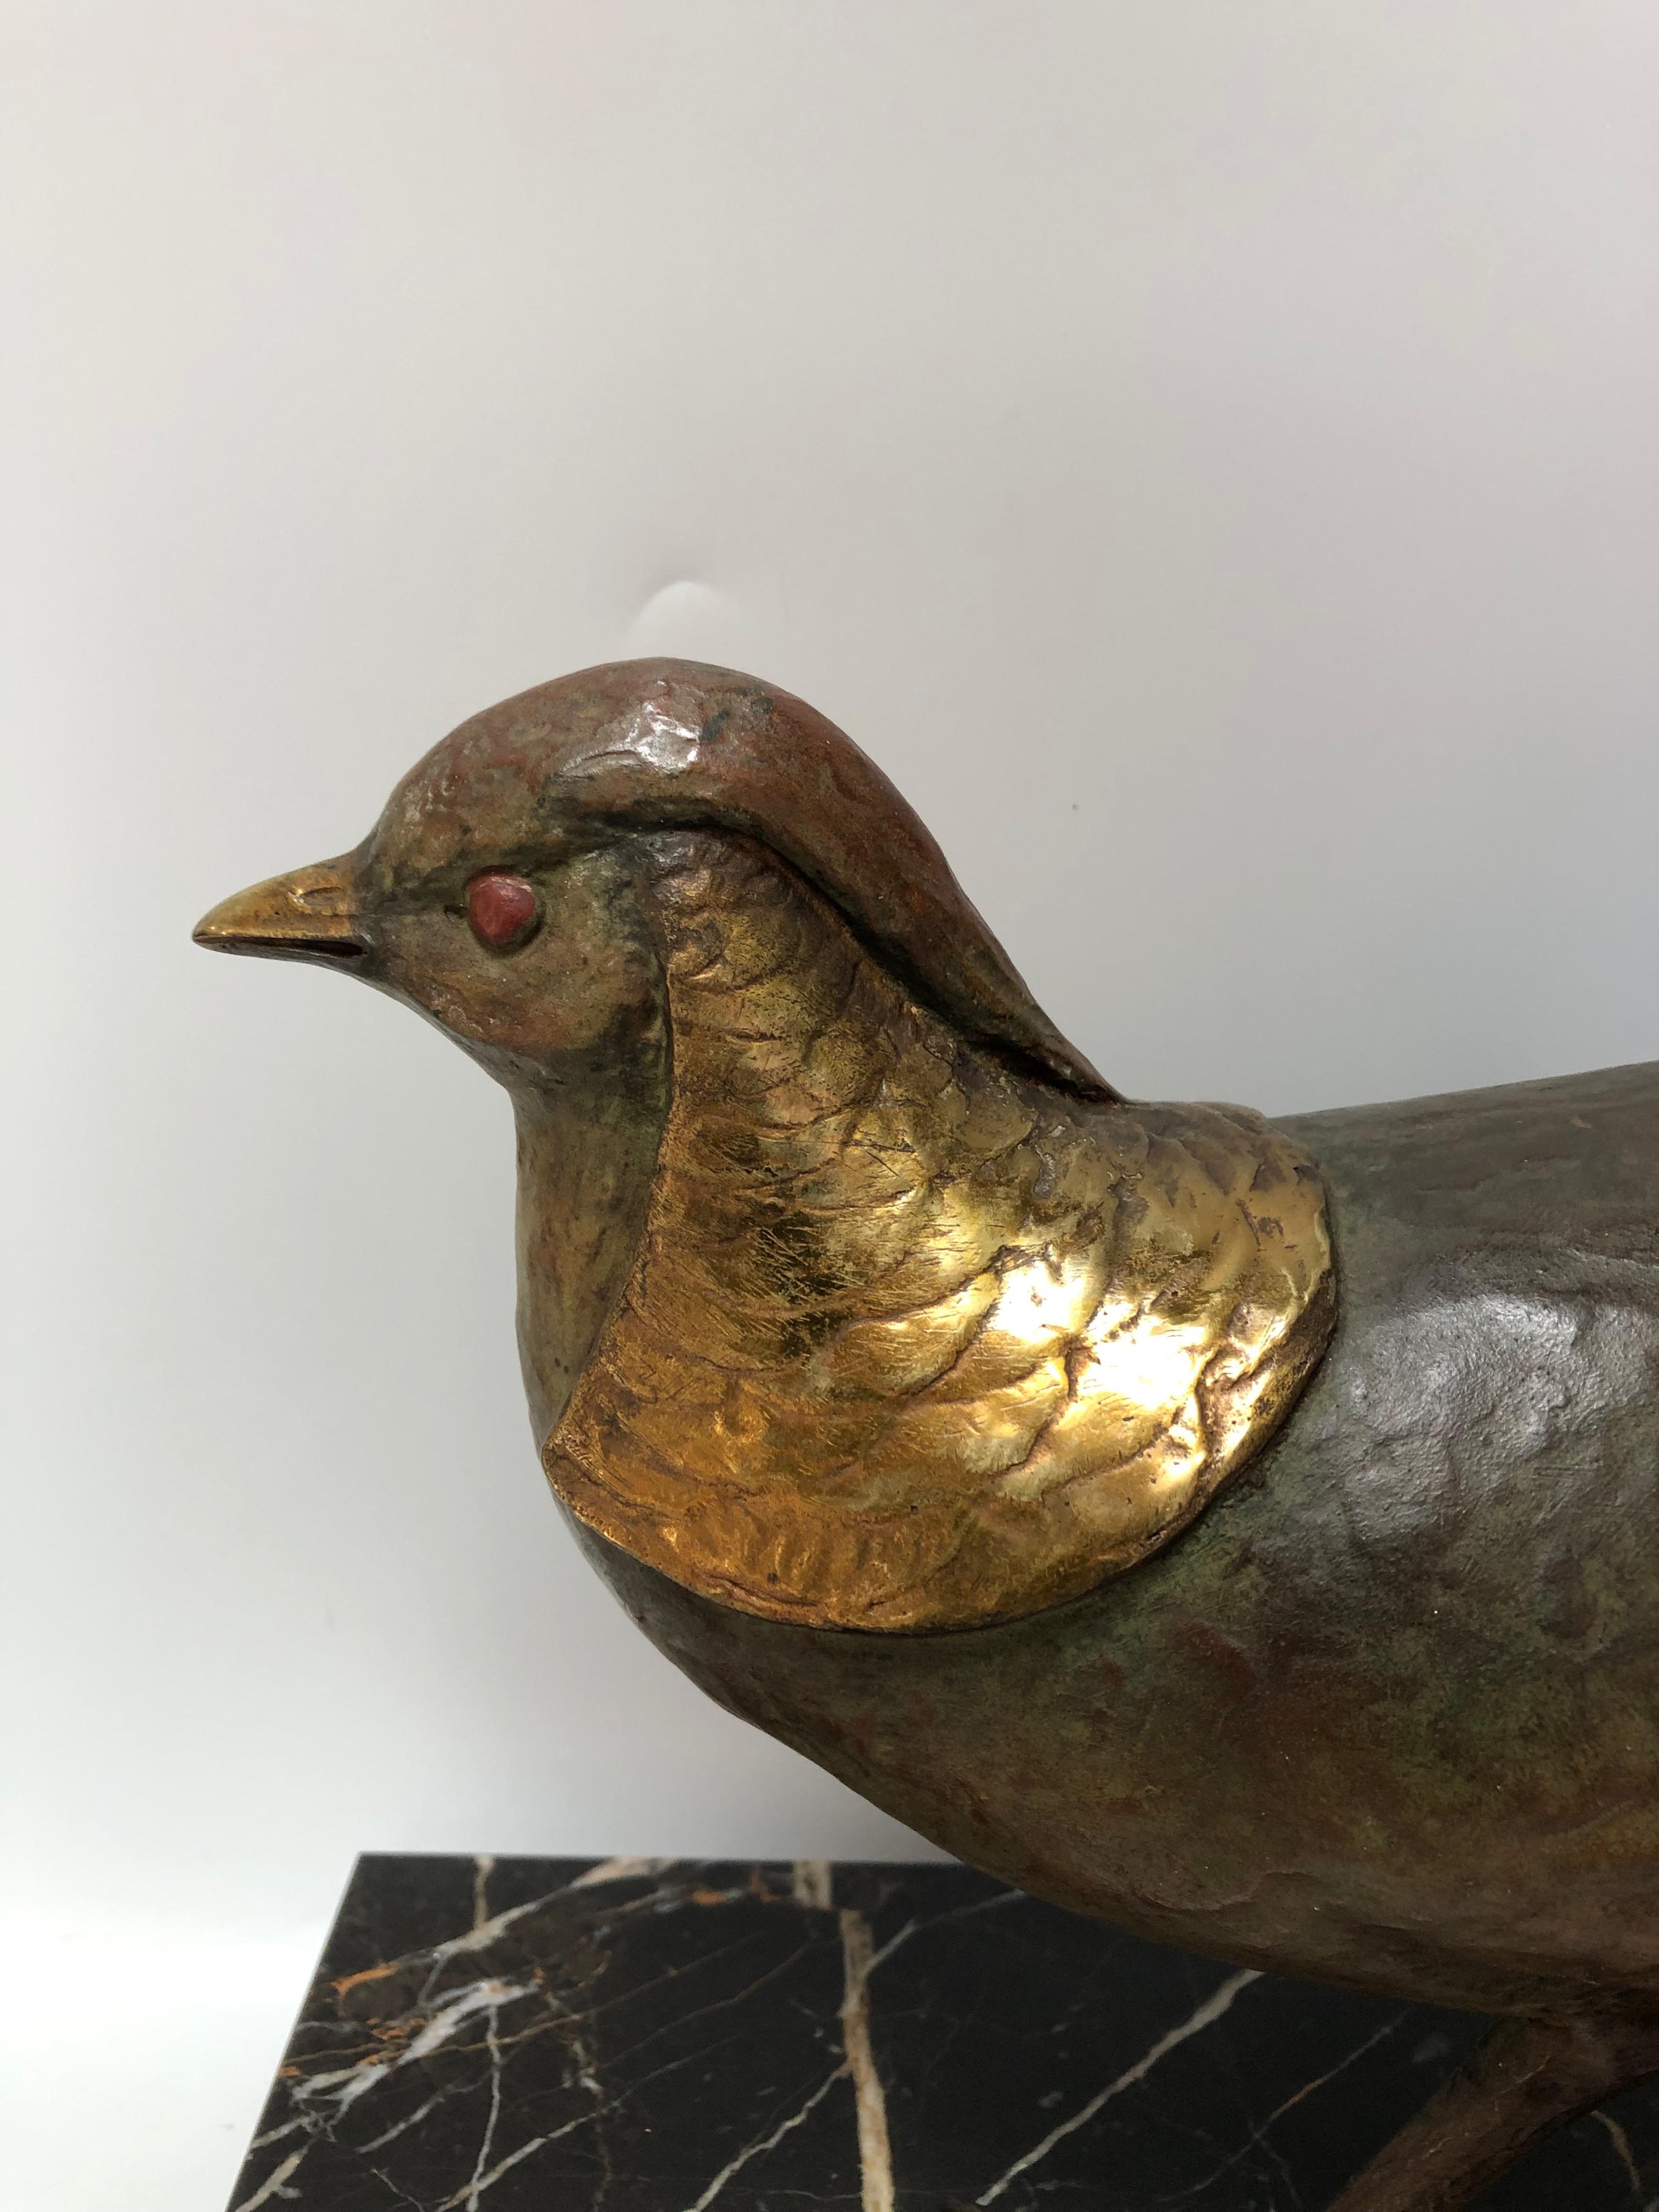 Art deco bronze sculpture circa 1930.
Gilded pheasant with several patinas on a marble base.
Signed L Carvin for Louis Albert Carvin.
In very good condition, note a small chip on the onyx in one of the corners.
Total height: 27 cm
Length: 56